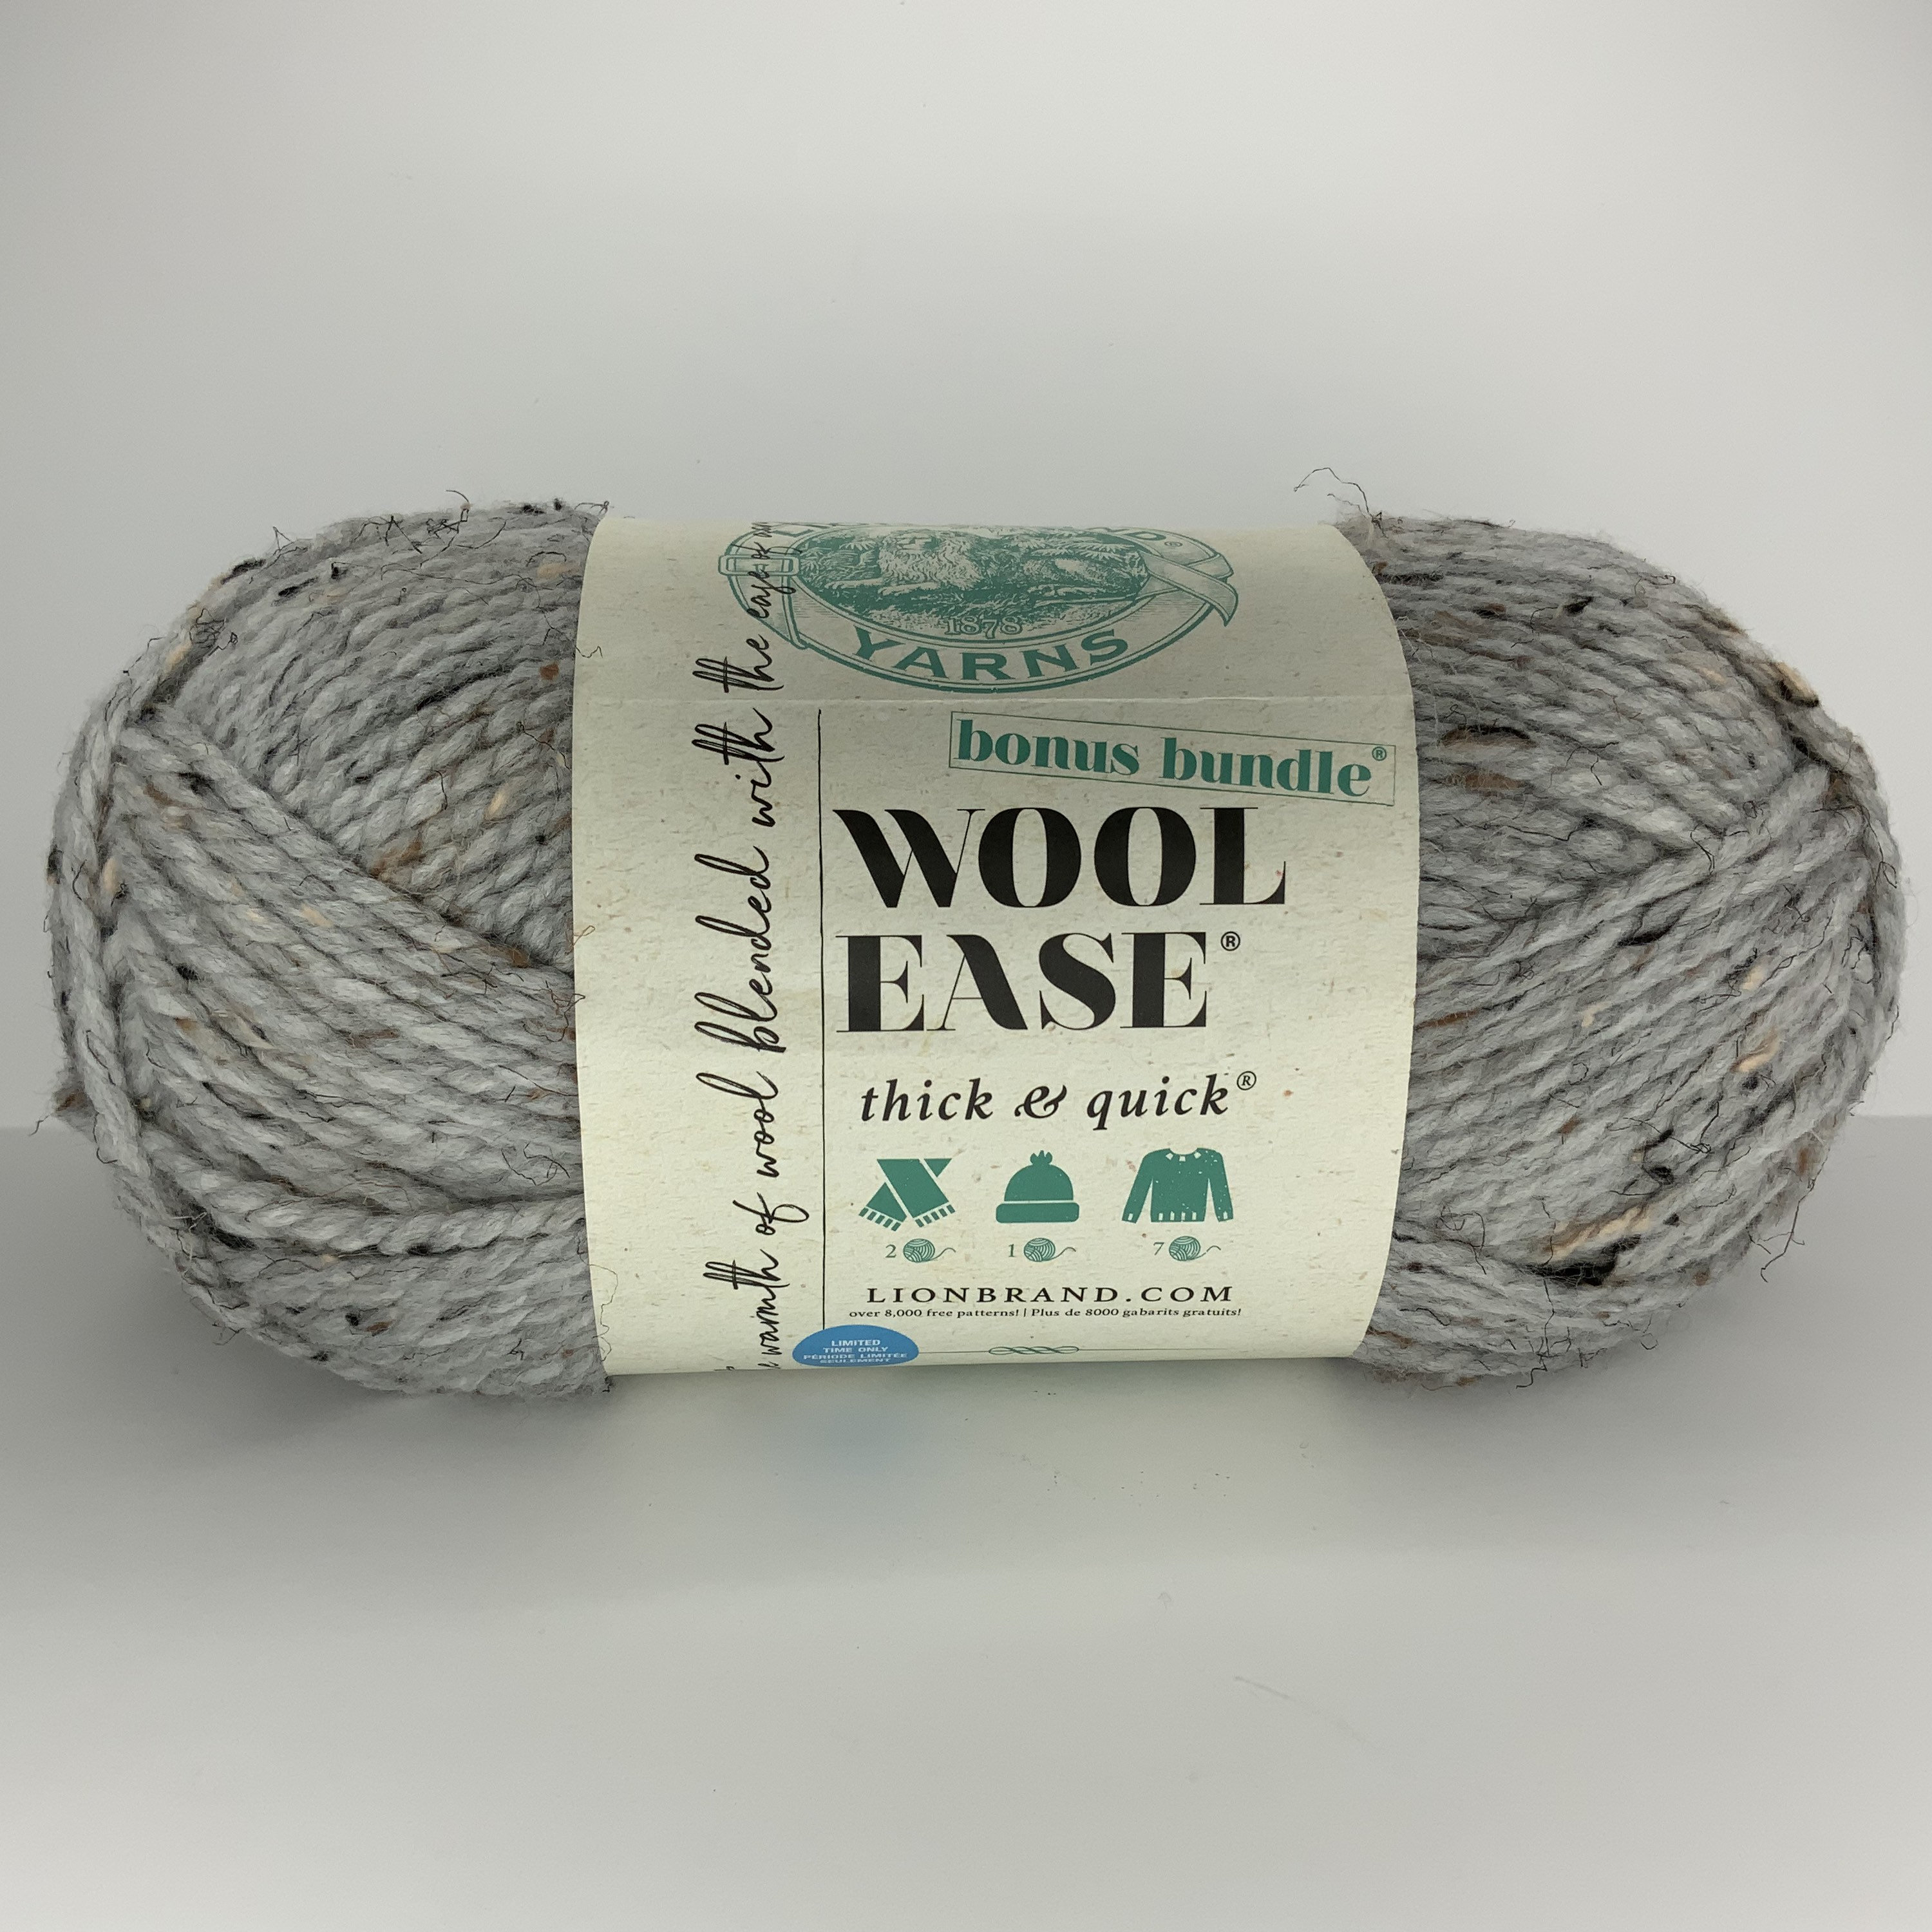 Lion Brand Thick & Quick Yarn Bundle, Navy, Case of 30